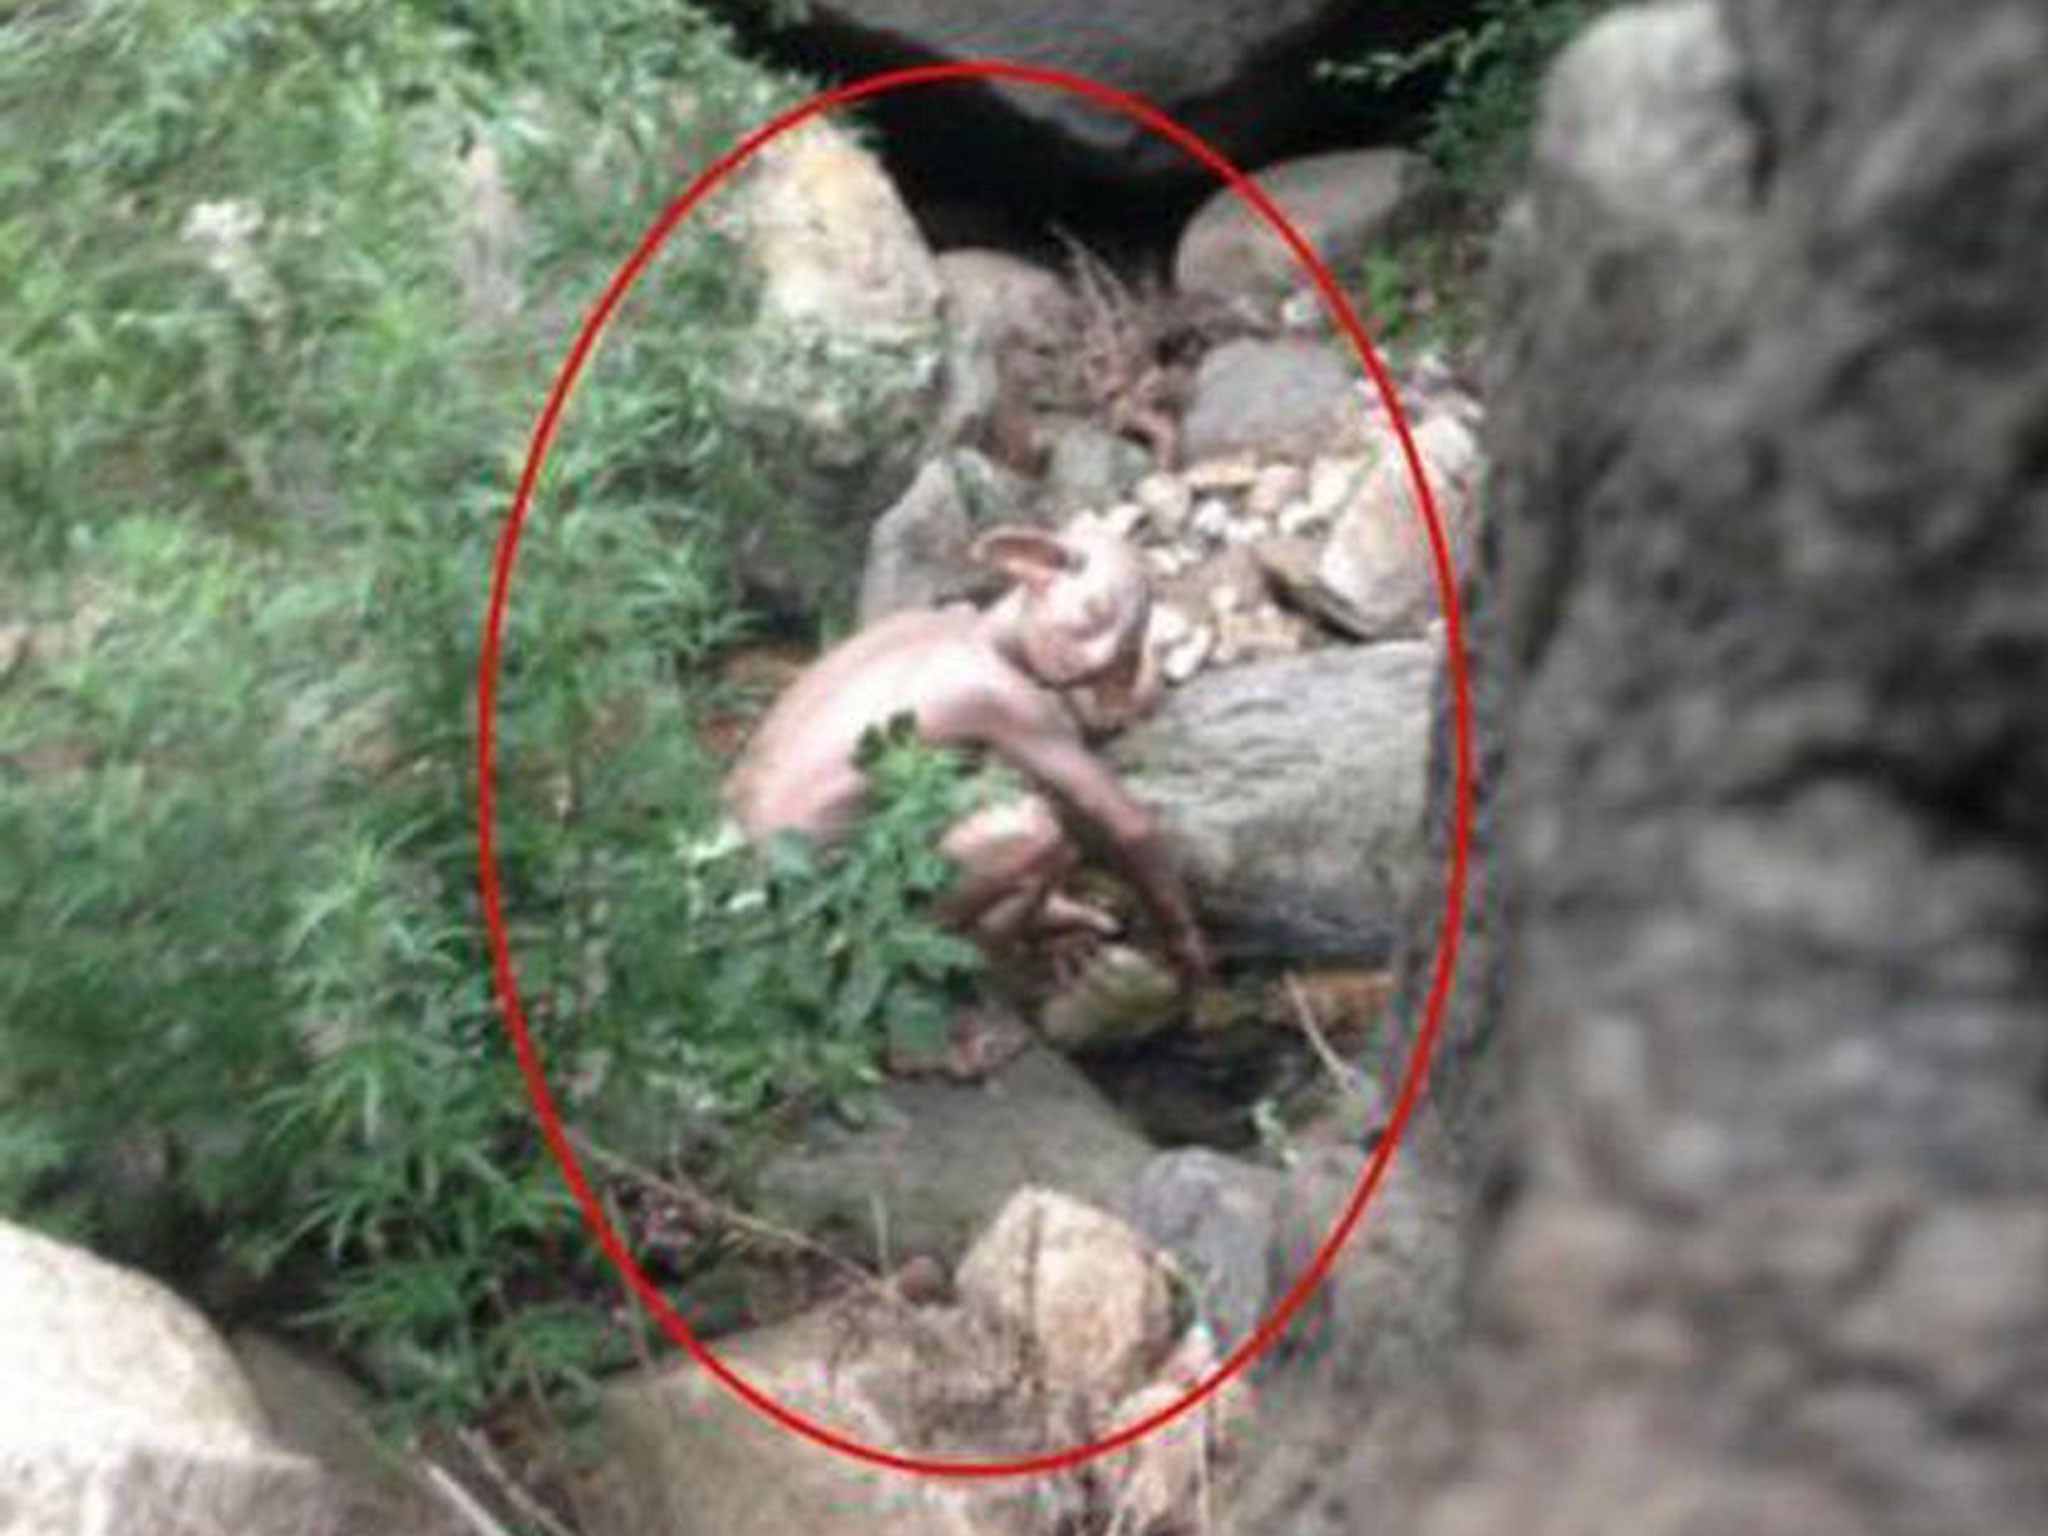 A man claimed to have photographed a human-like 'monster' in a valley near Beijing